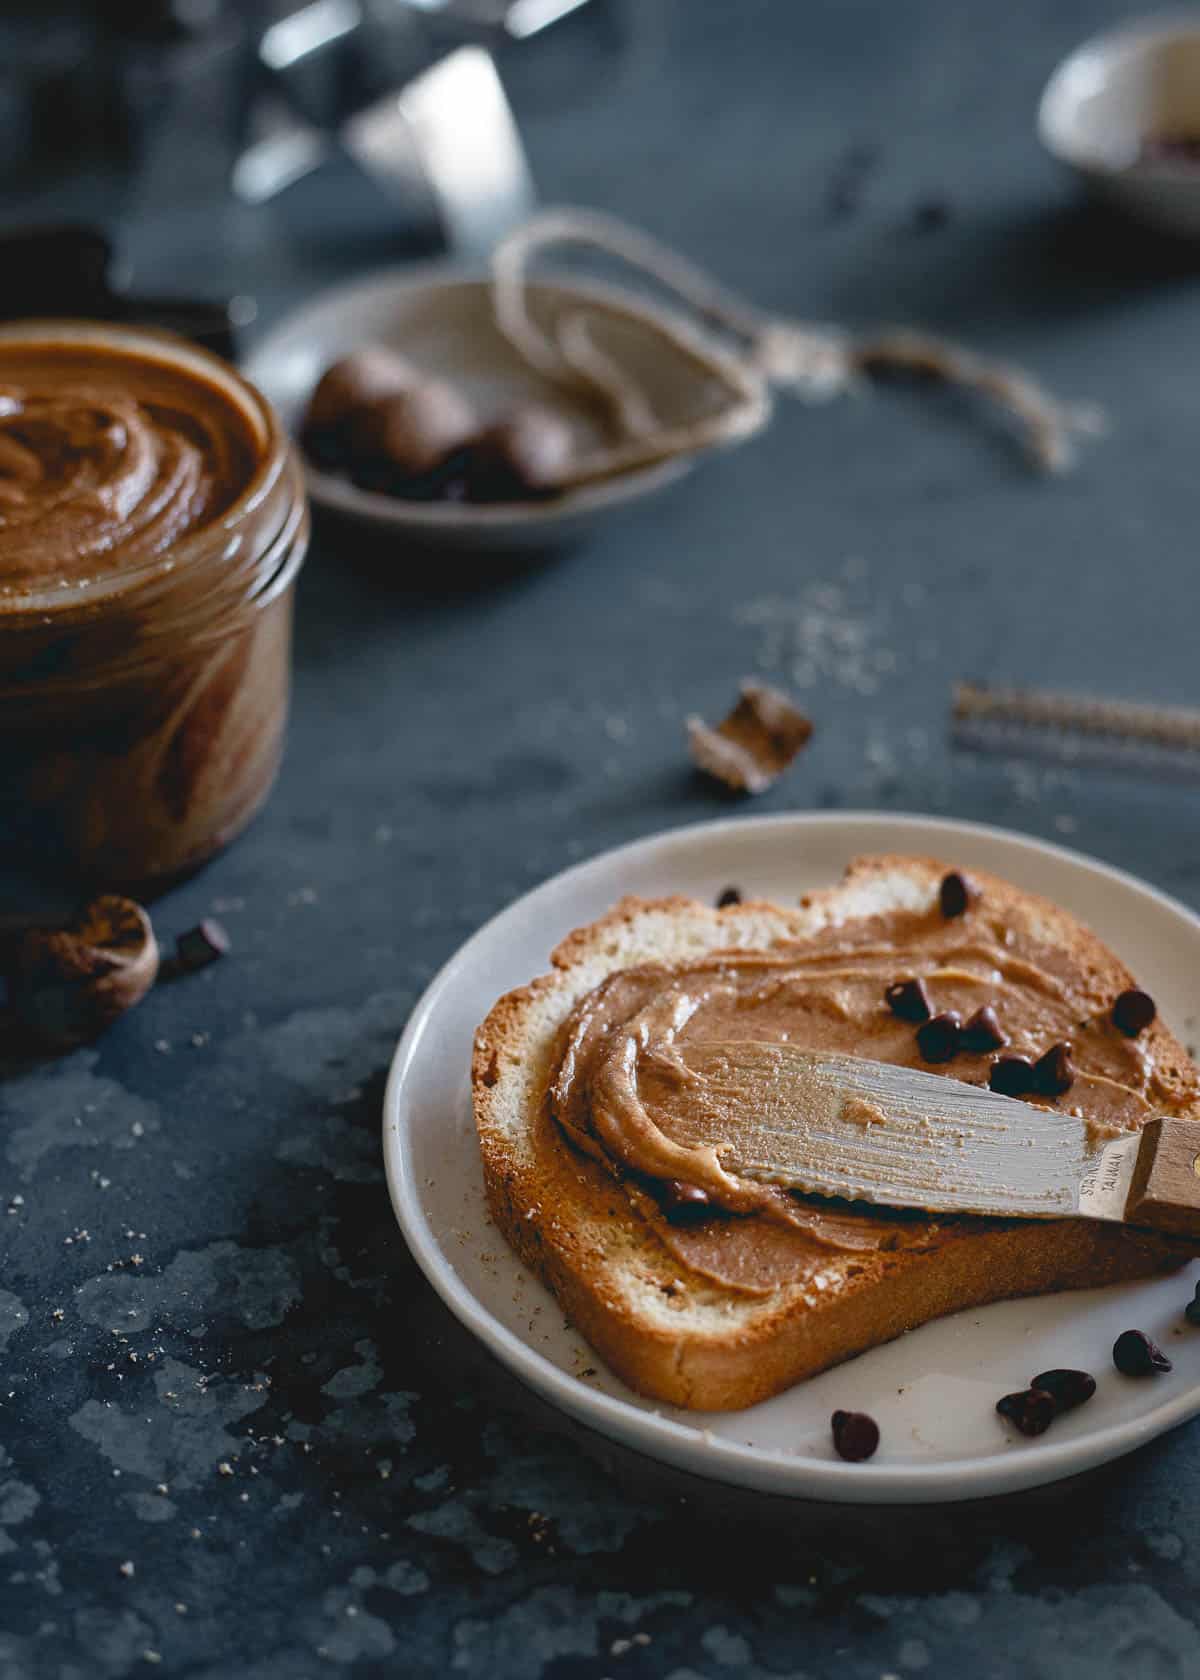 Creamy gingerbread peanut butter on toast with mini chocolate chips.